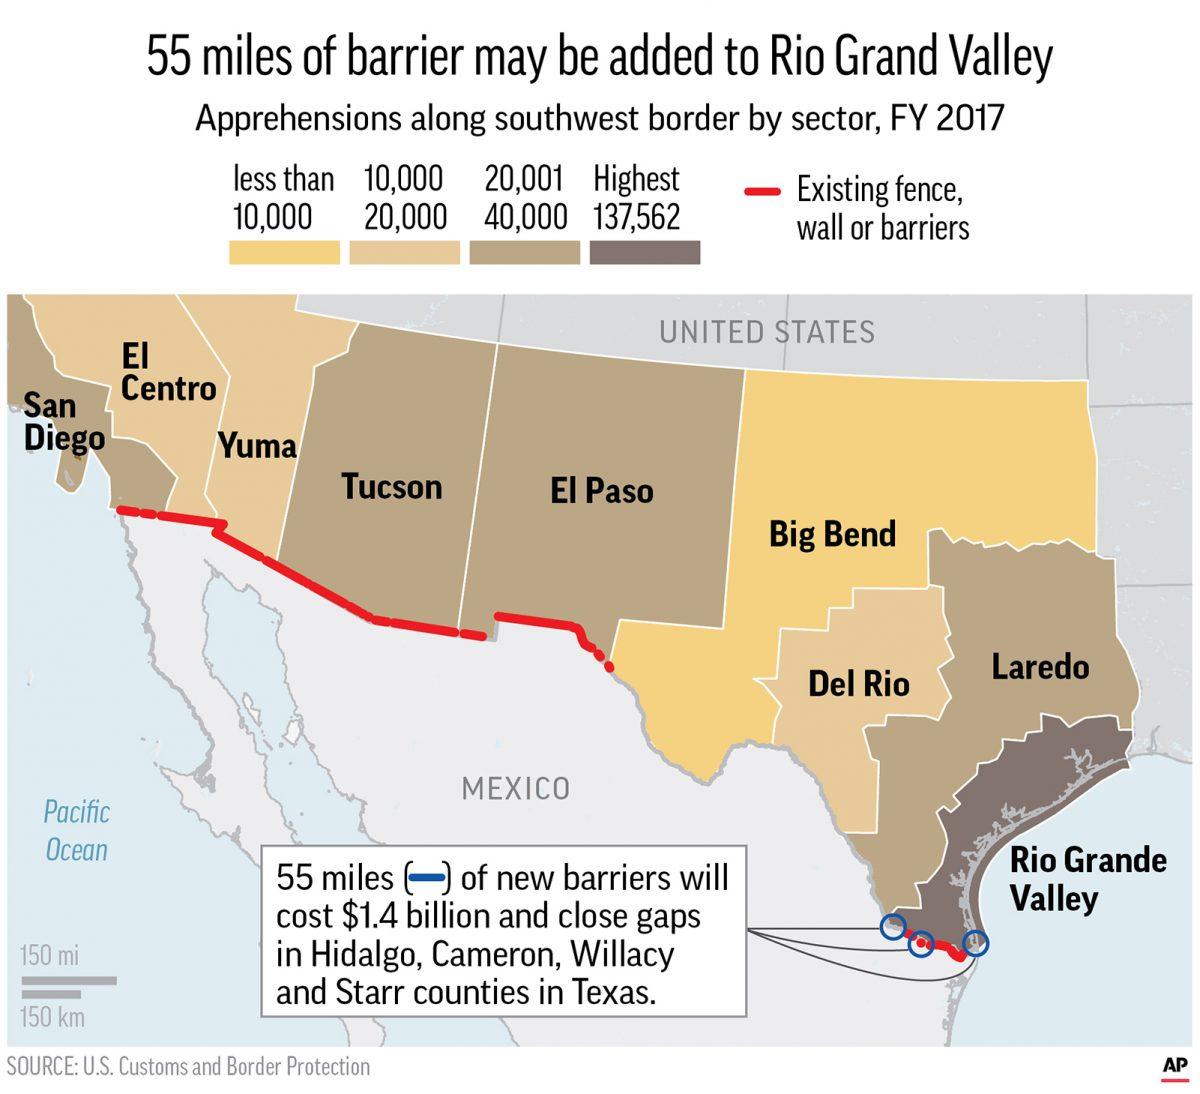 Graphic shows existing border fence and barriers built and apprehensions by border sector in 2017. (image via AP)